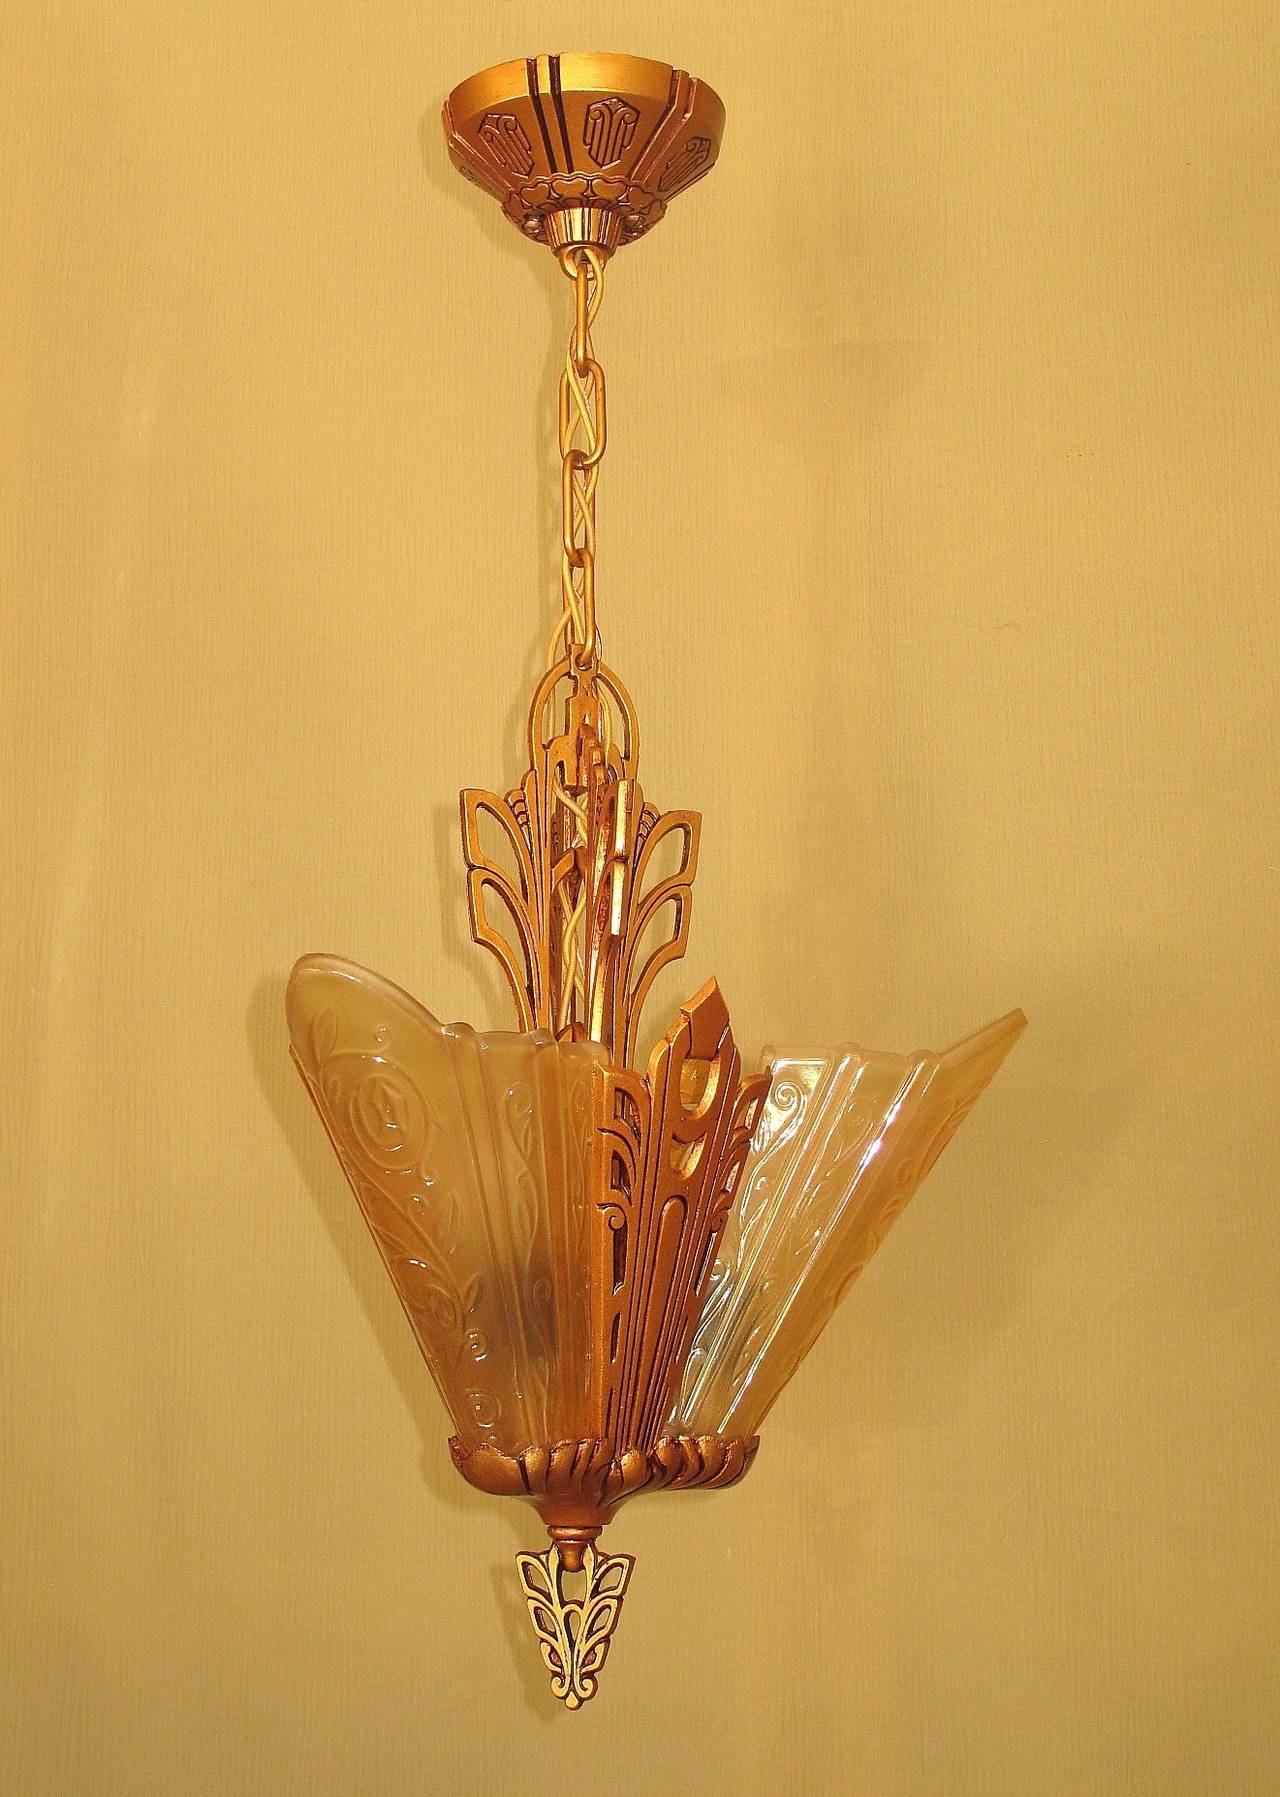 Painted Deco Vintage Ceiling Lights with 3 Amber Slip Shades For Sale